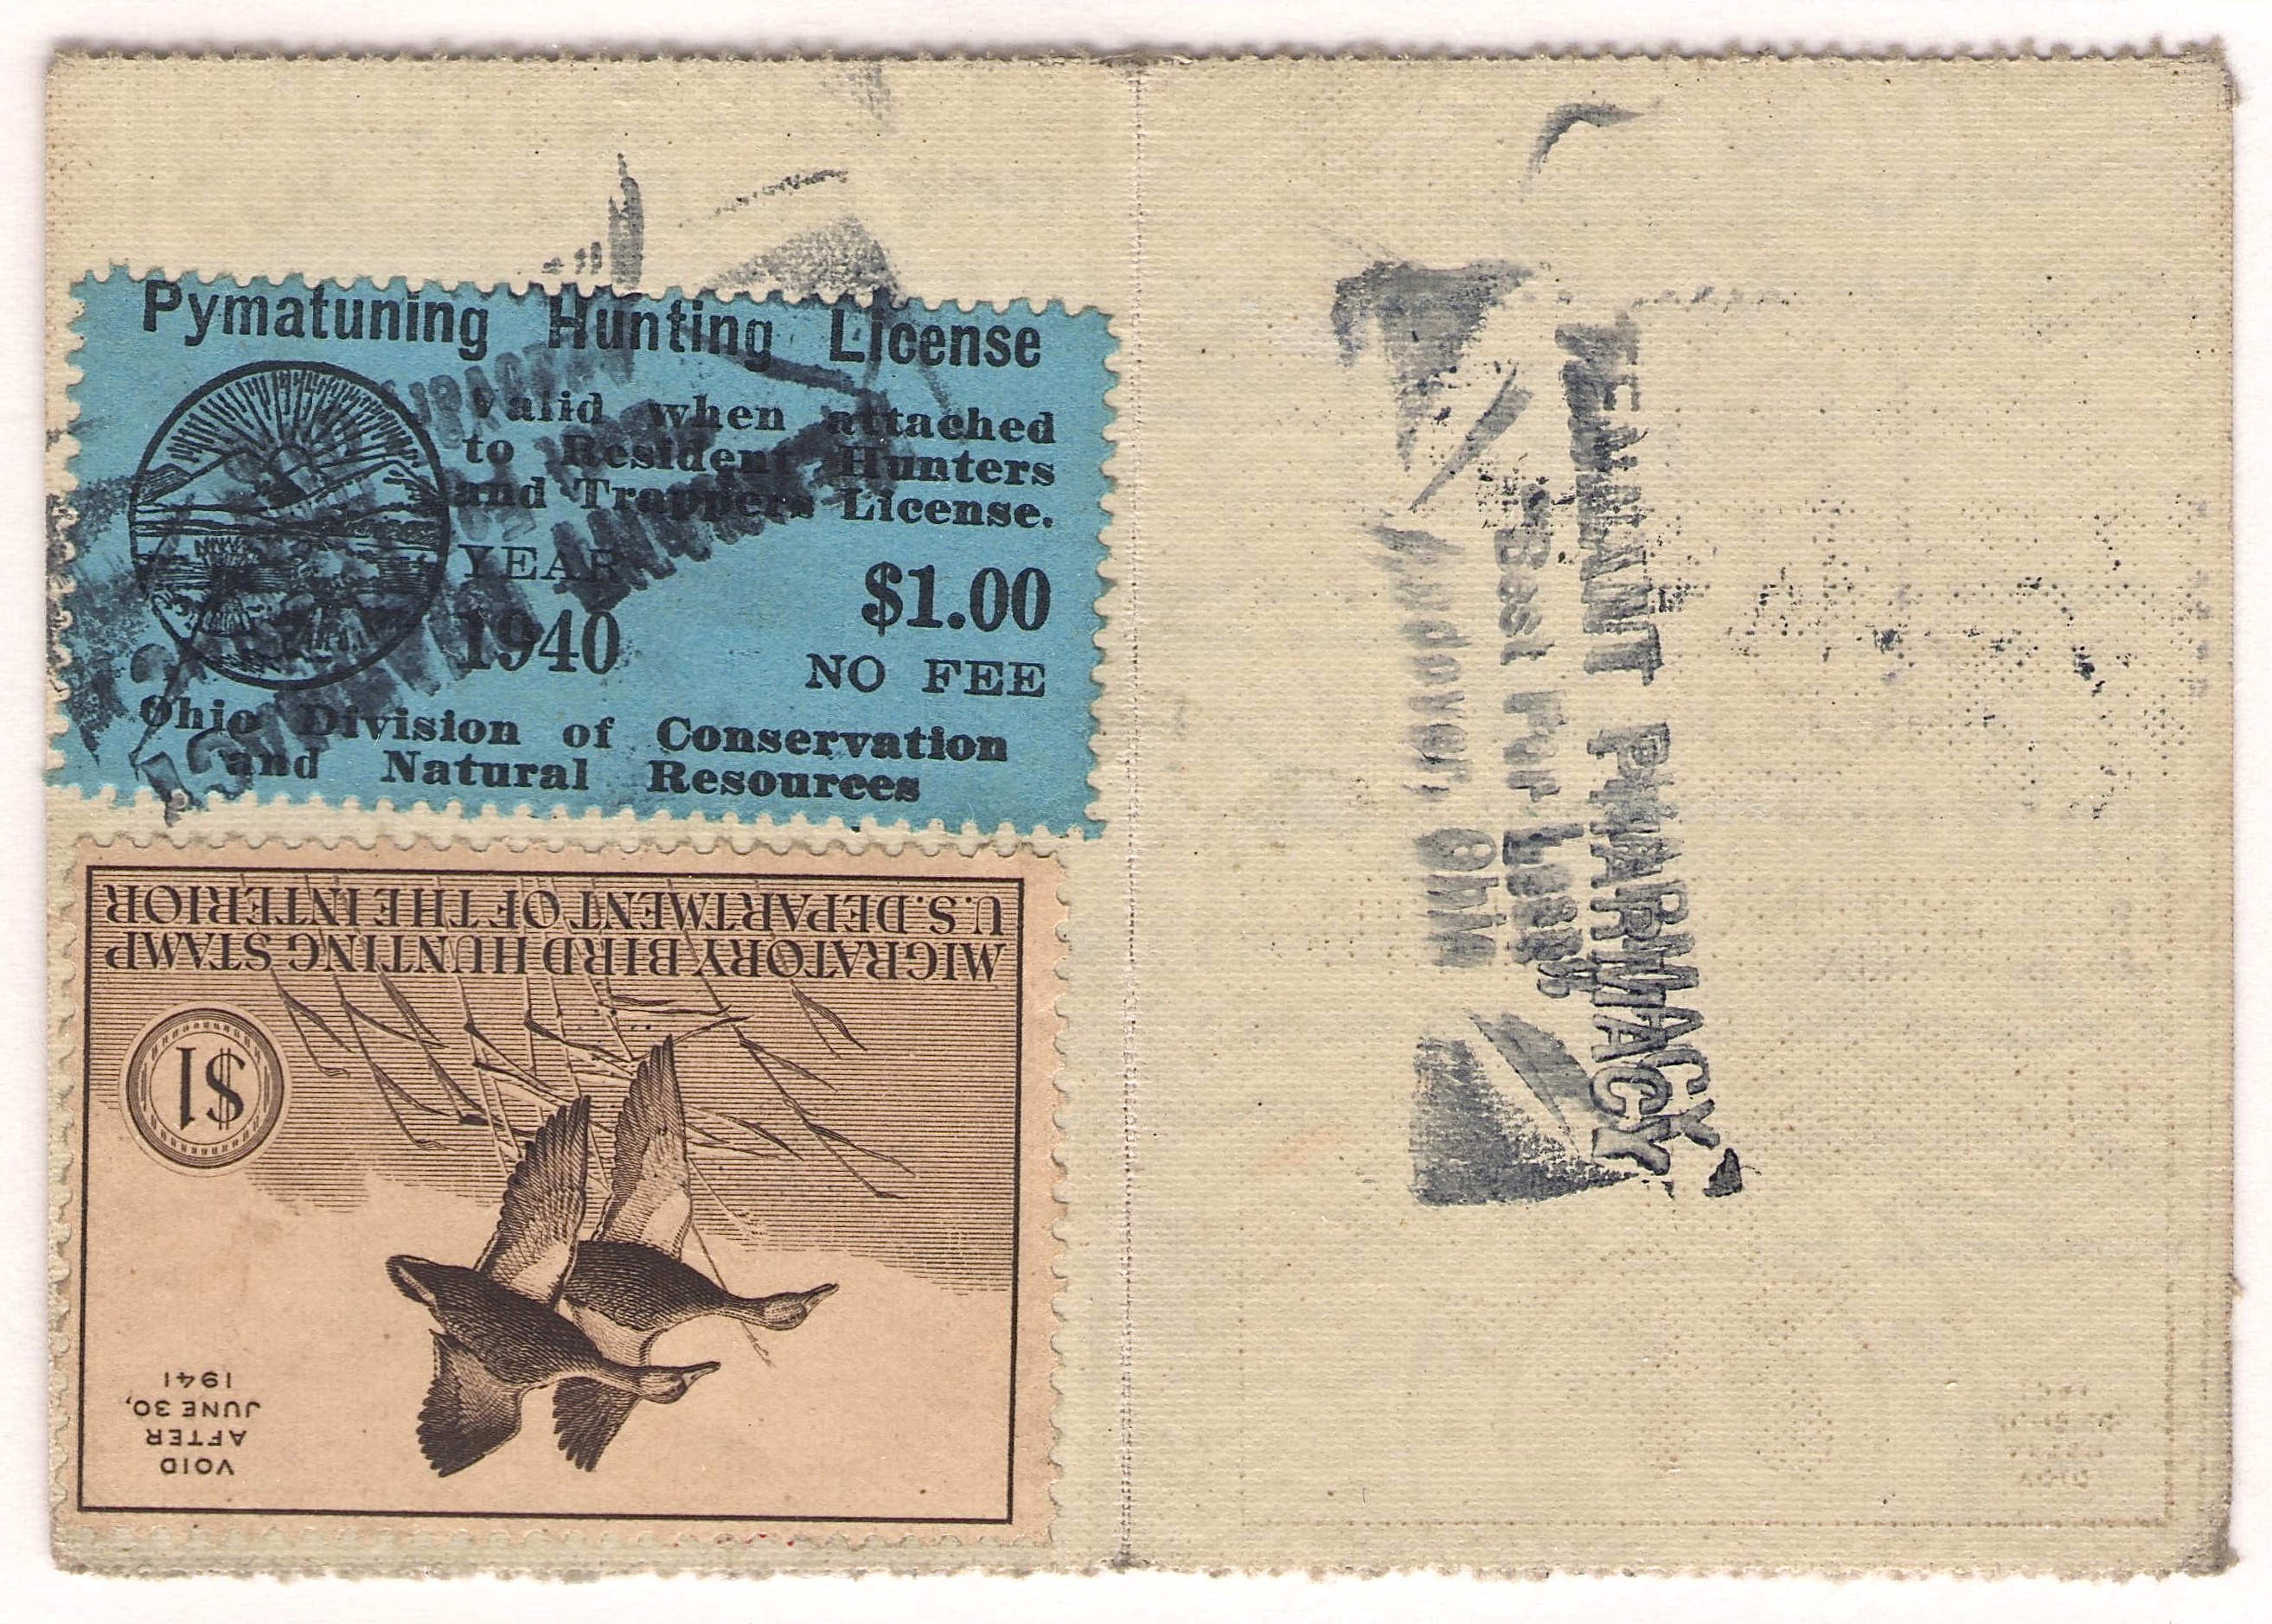 1940 Pymatuning waterfowl stamp affixed to license and cancelled "Tennant Pharmacy" 